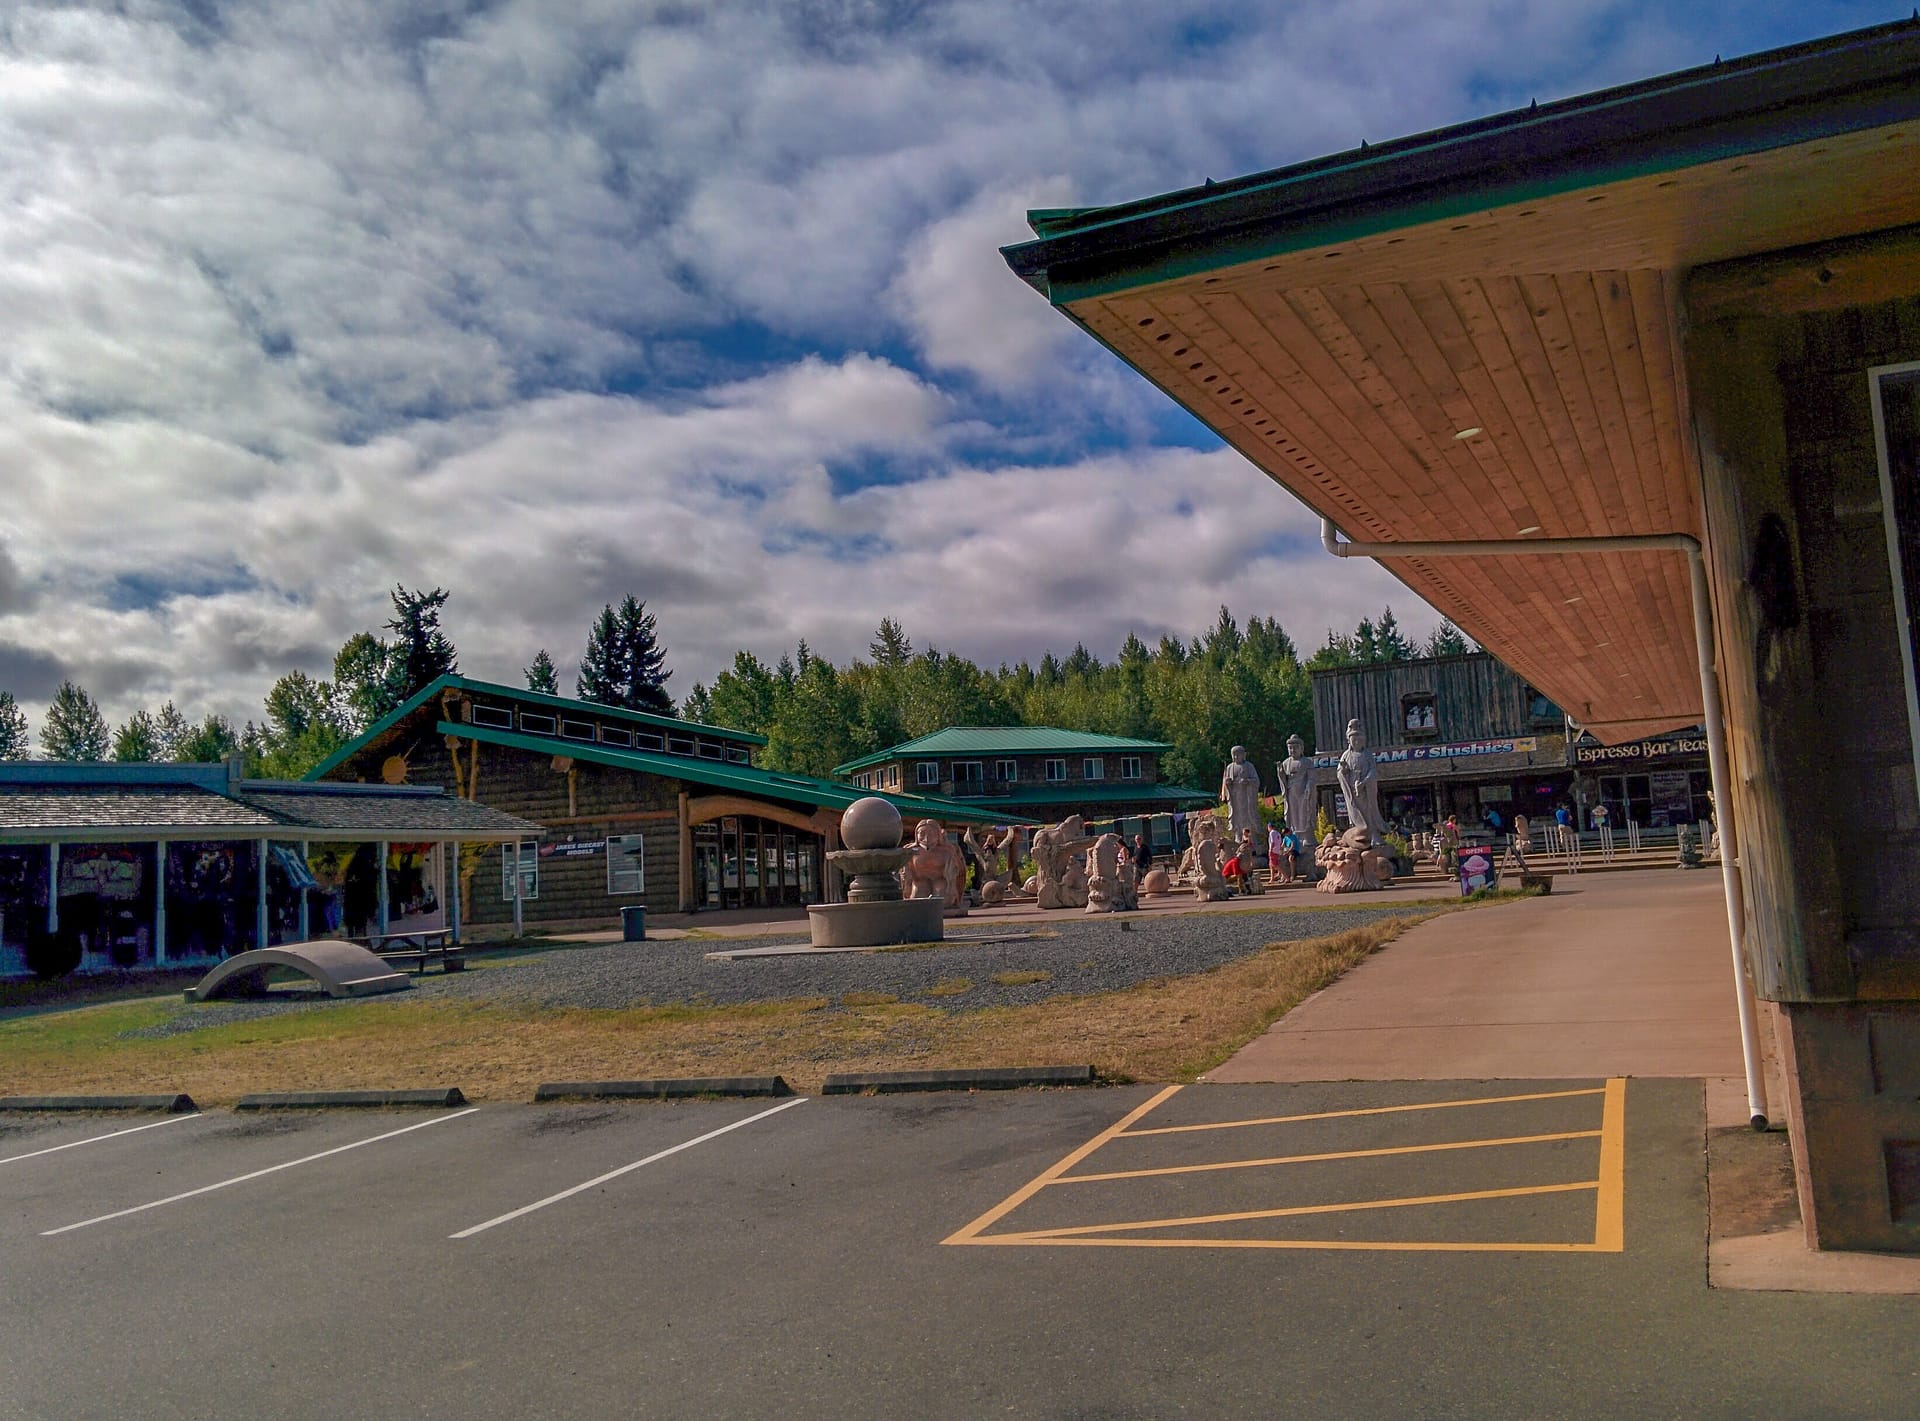 coolest places in BC, statue, parking lot, sky